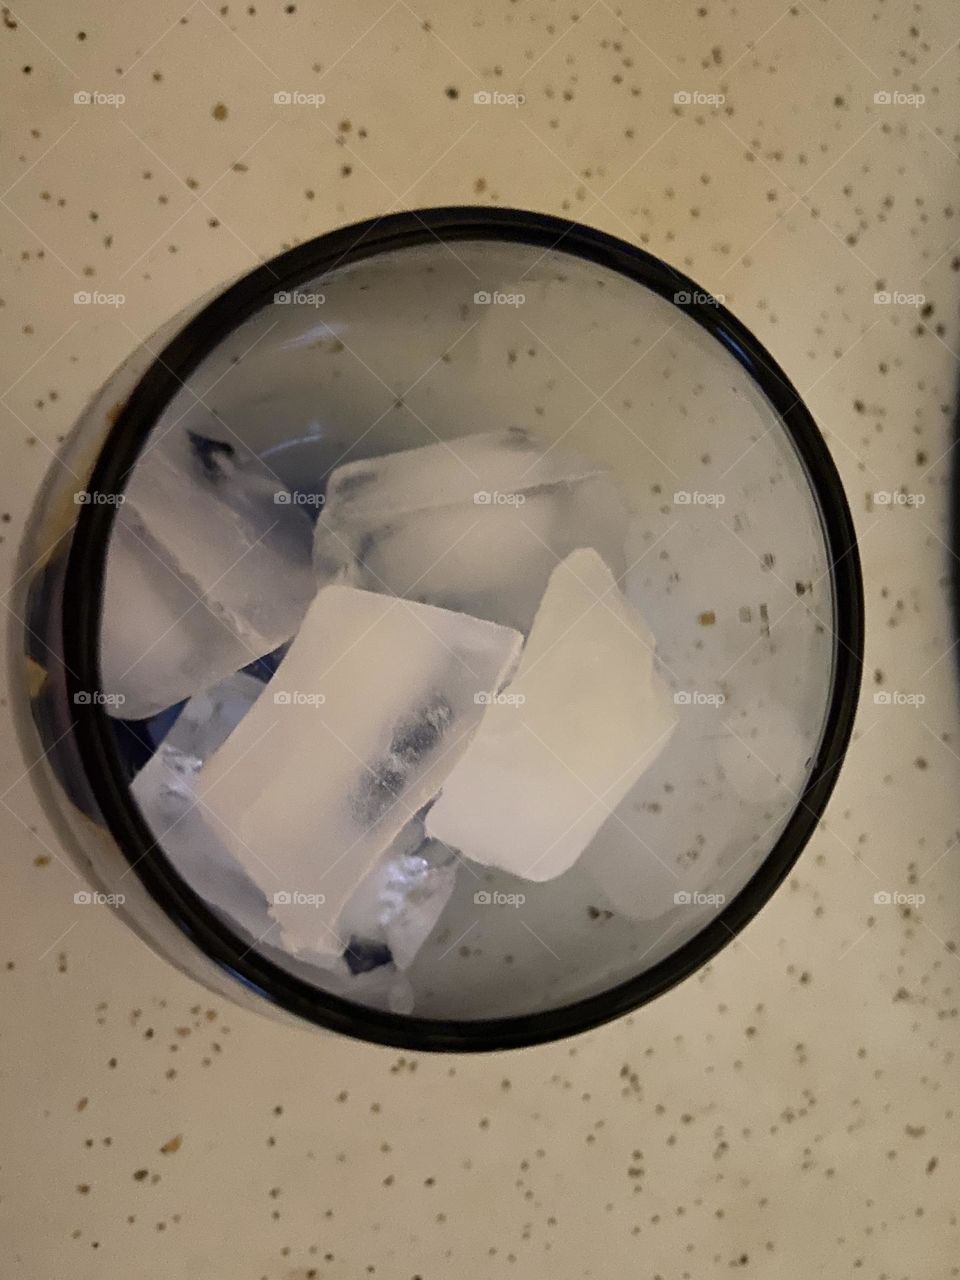 Ice cubes (aka frozen water) in a gray-tinted glass on the white speckled kitchen counter. 